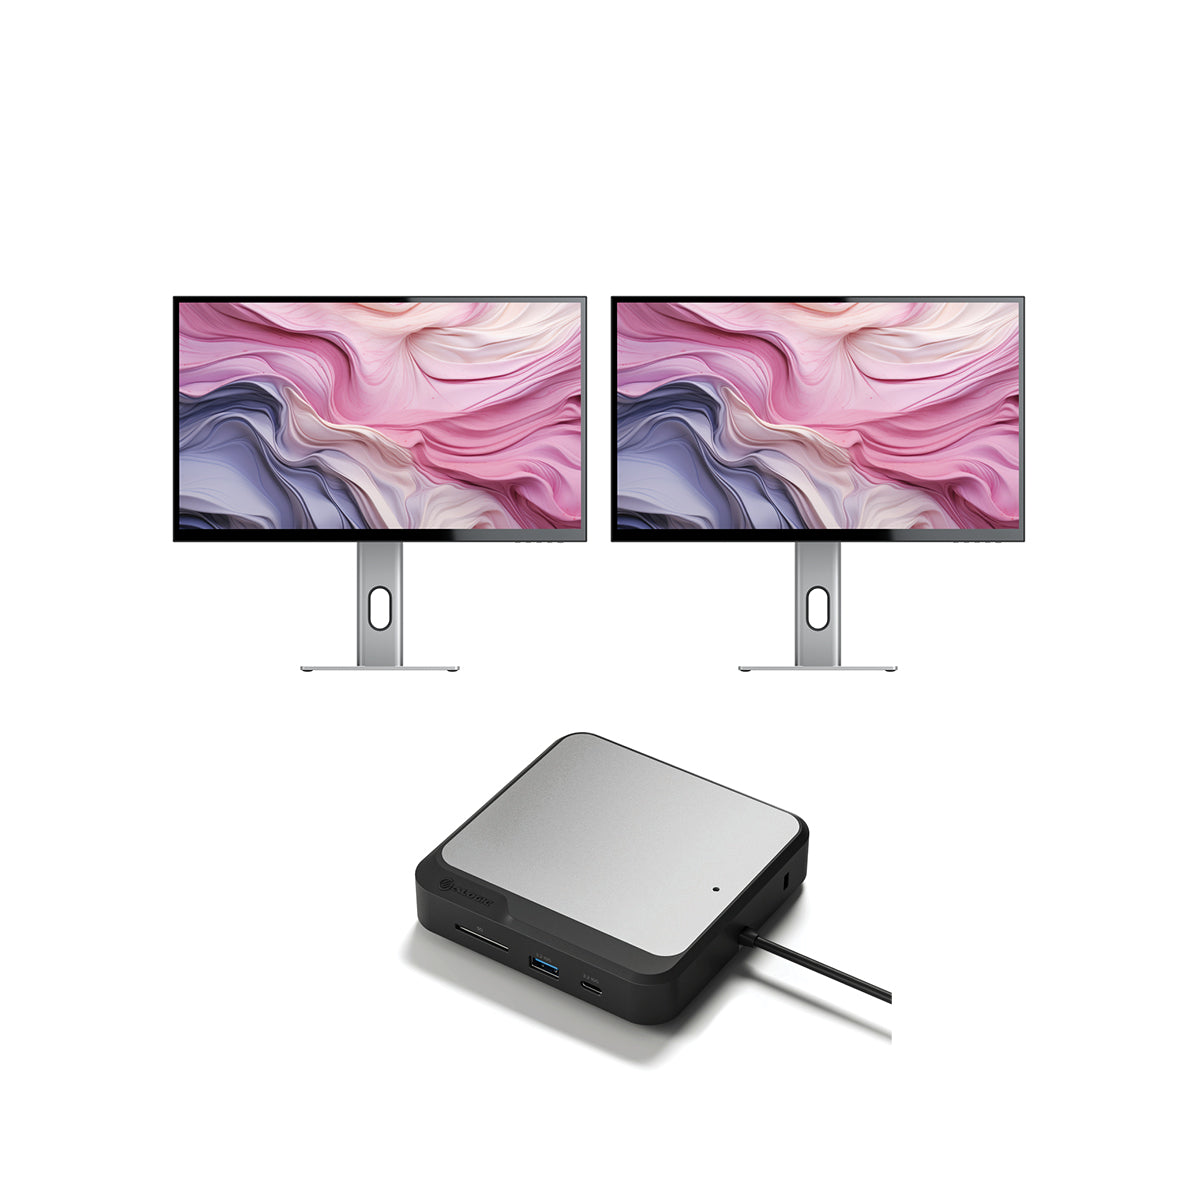 CLARITY 27" UHD 4K Monitor (Pack of 2) + Dual 4K Universal Docking Station - HDMI Edition